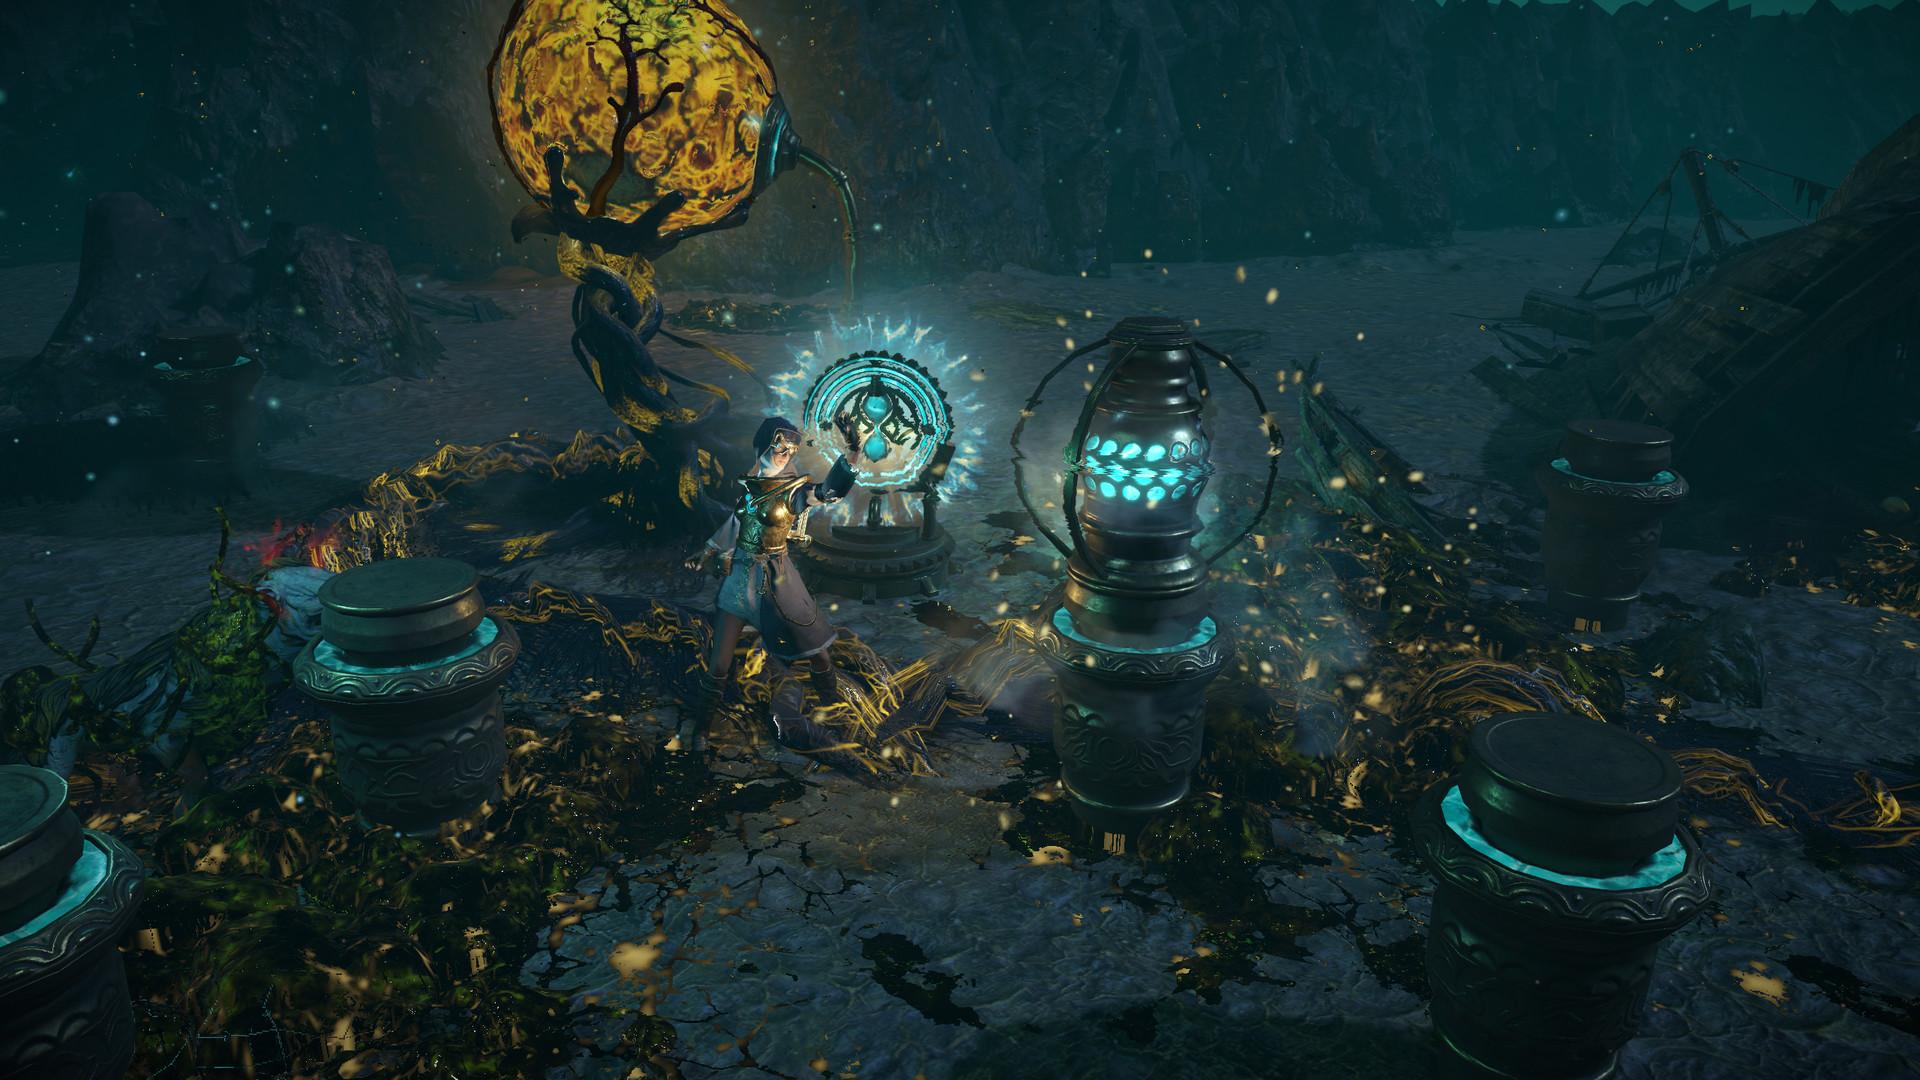 Screenshot №27 from game Path of Exile